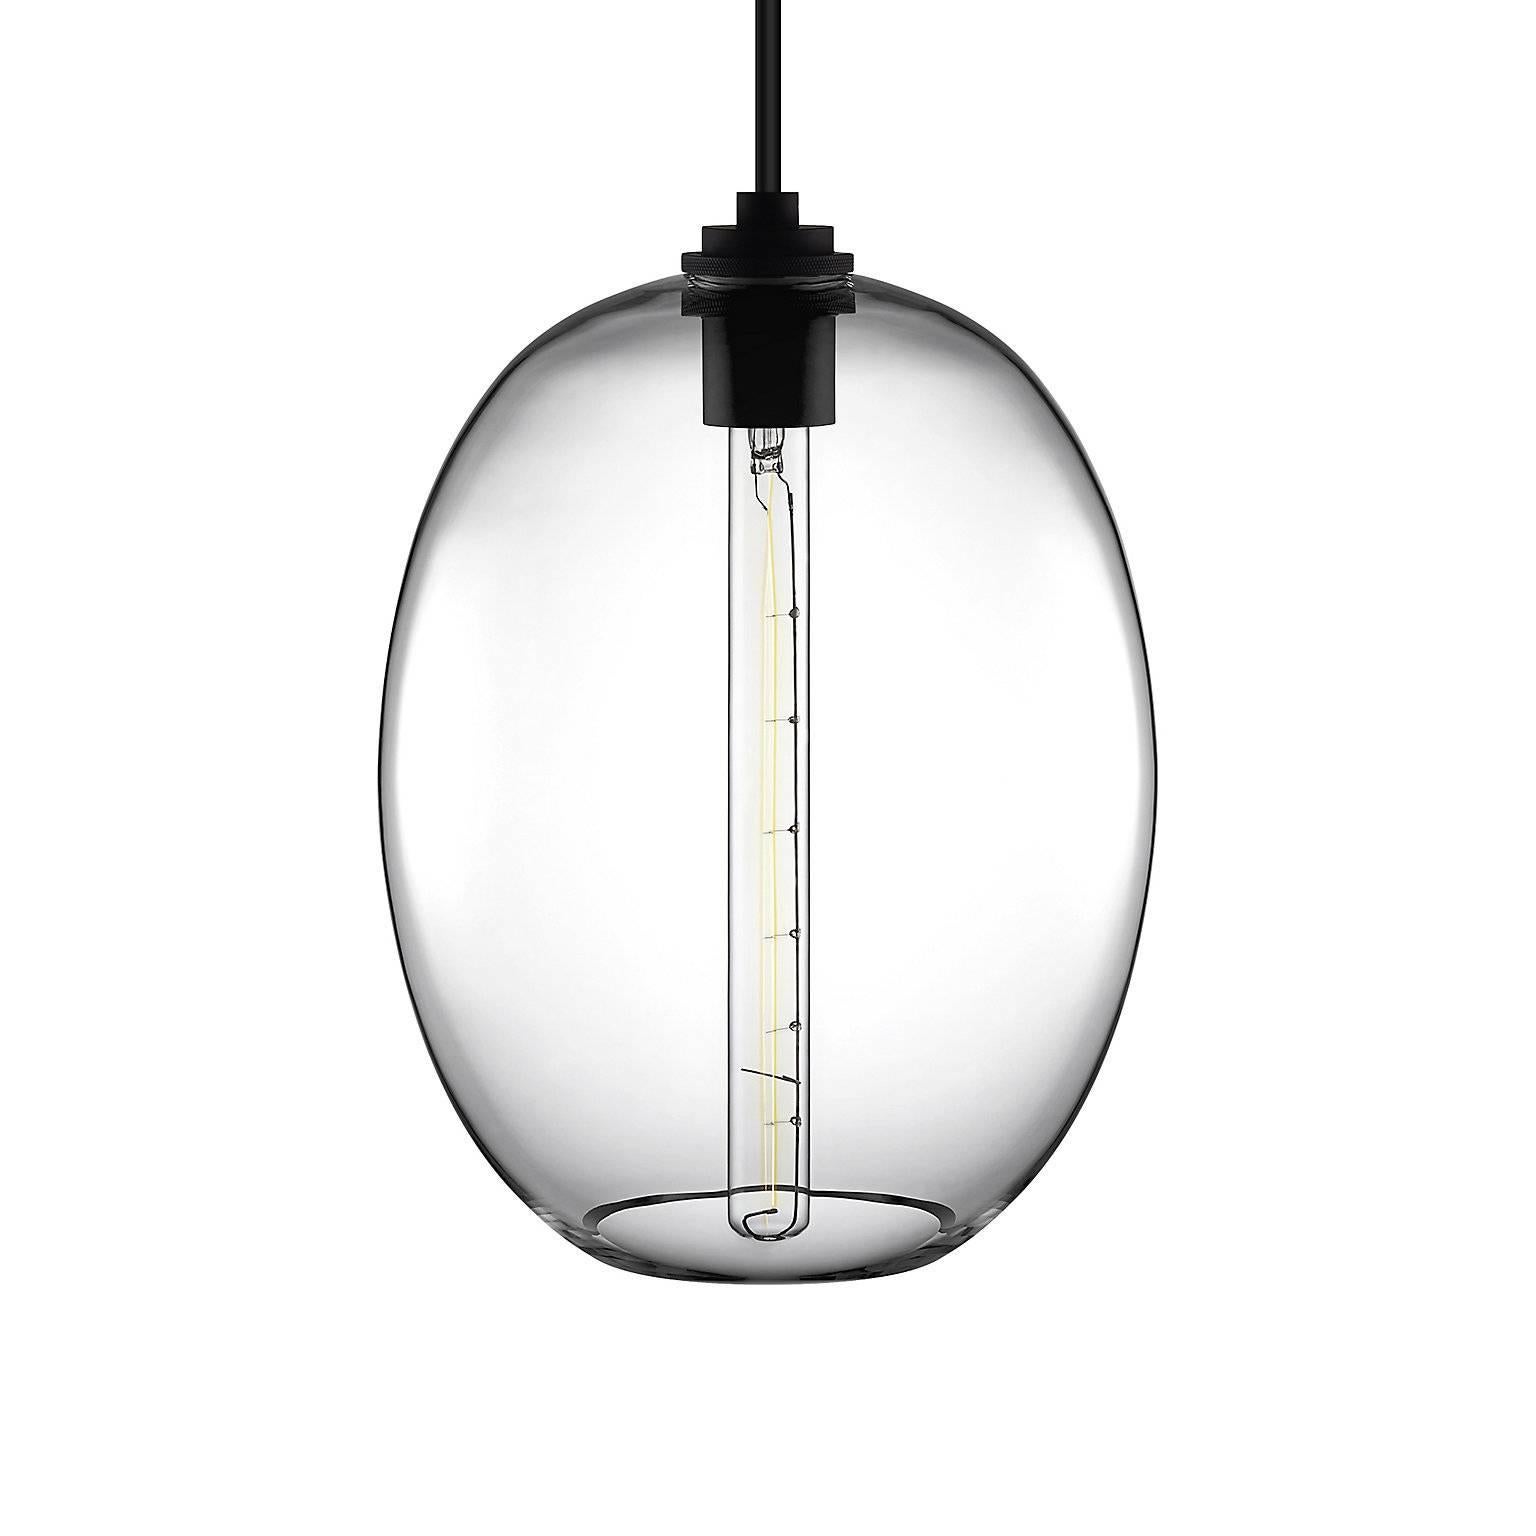 When paired together, the brilliant proportions of the Grand and Petite Ellipse pendants complement one another to create an elegant and distinctive design. Every single glass pendant light that comes from Niche is handblown by real human beings in